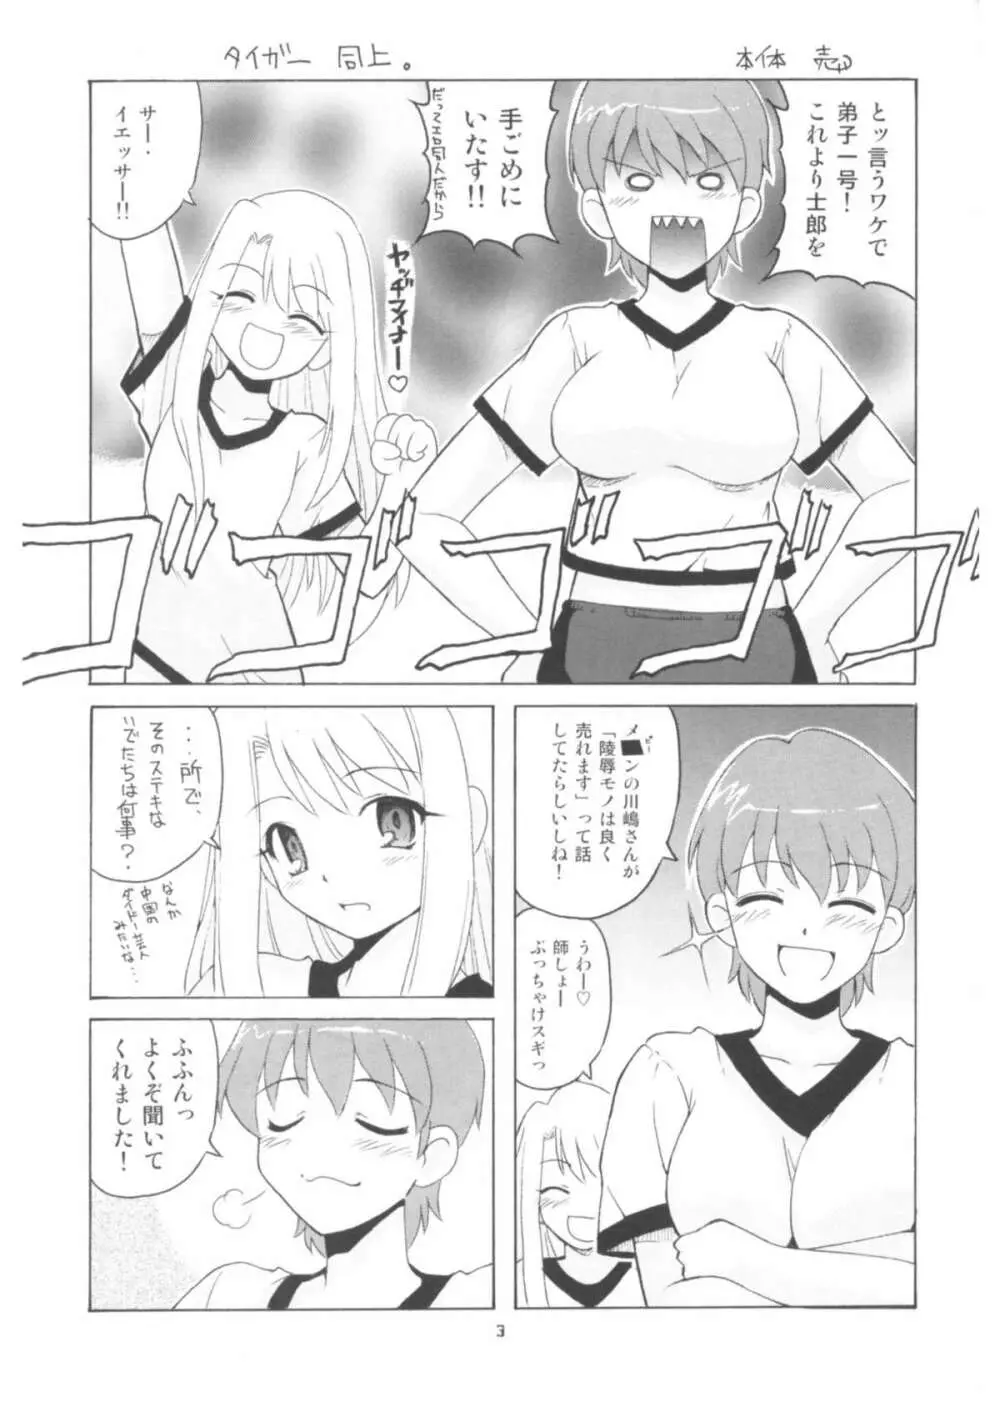 Let's タイガー道場！ Page.2